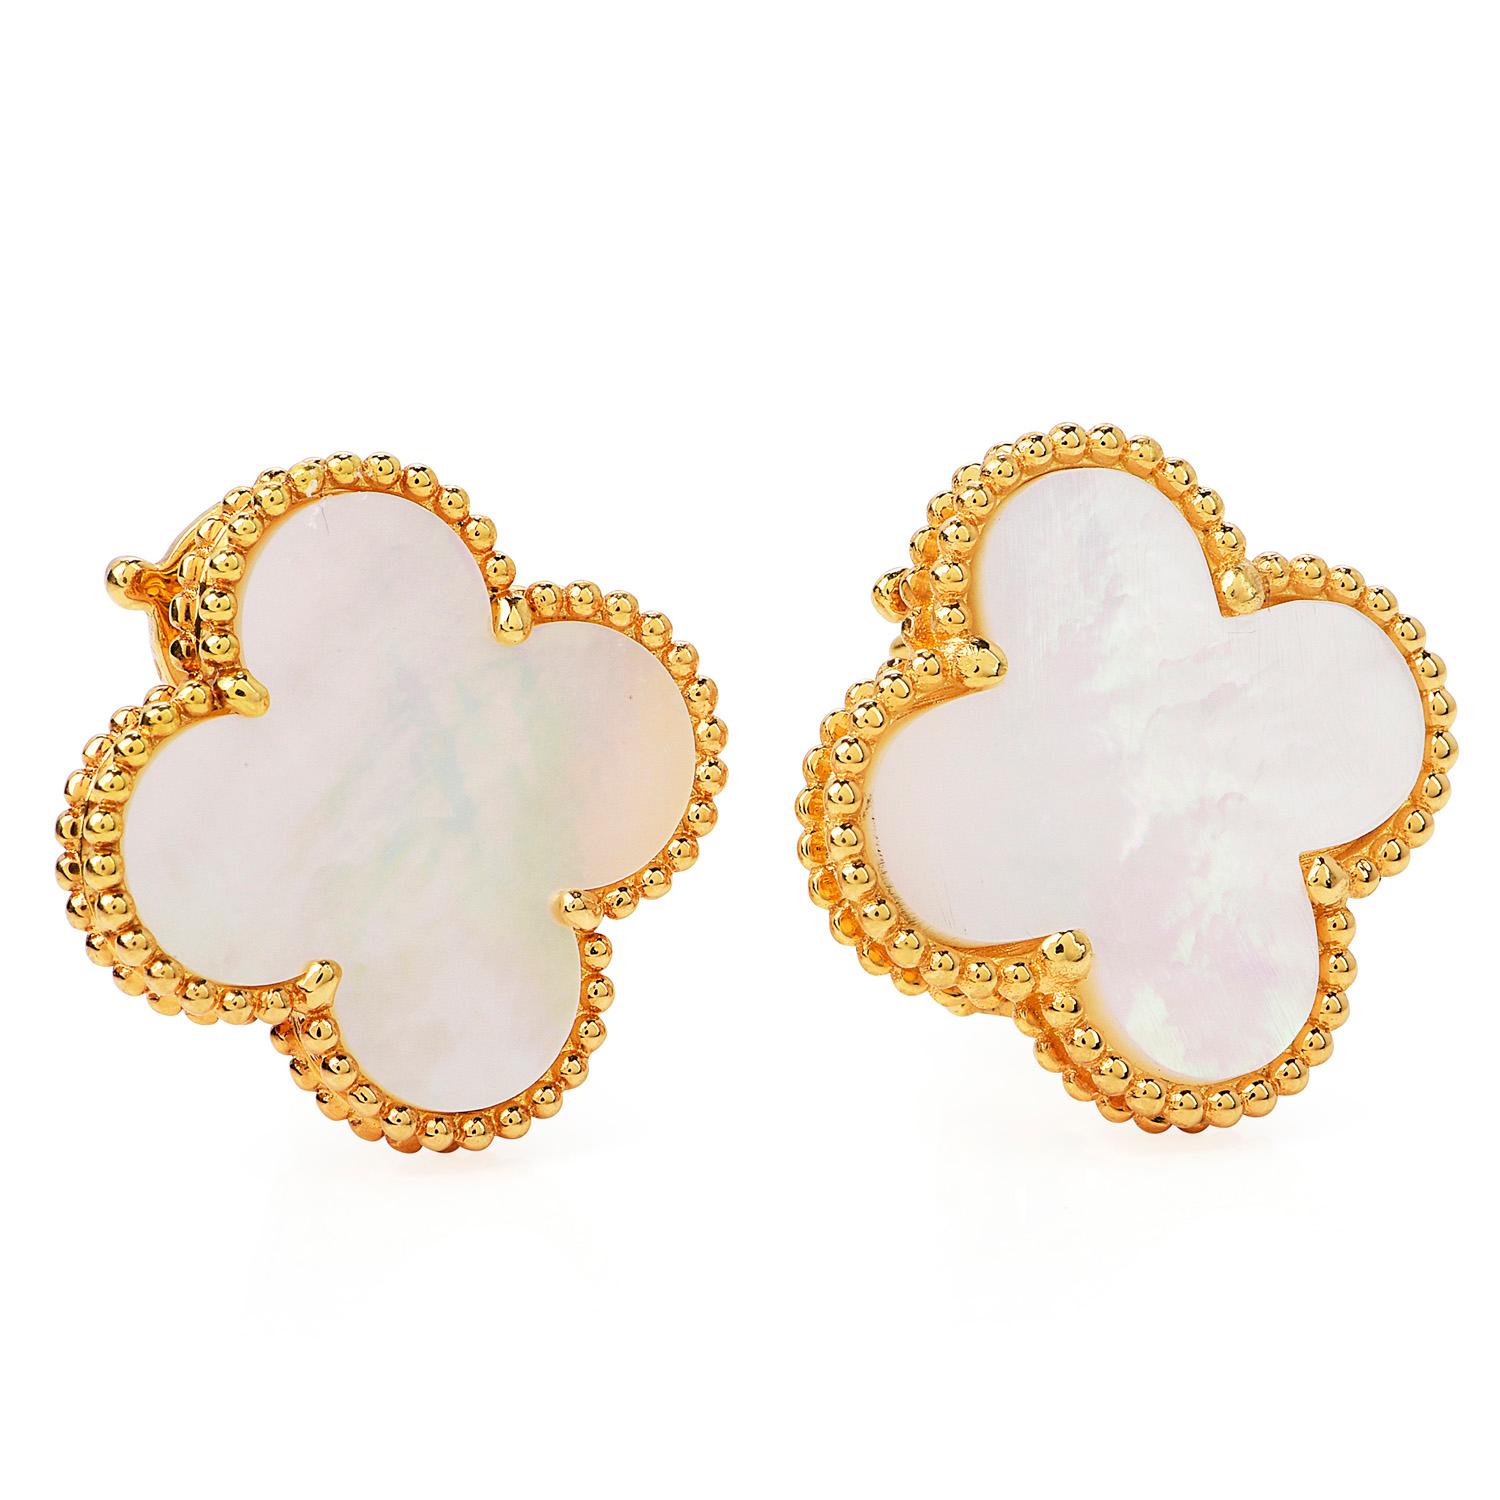 Van Cleef & Arpels Mother of Pearl 18K Gold Alhambra Earrings

This Van Cleef & Arpels Mother of Pearl 18K Gold Alhambra Collection Clip-on Earrings perfect for any occasion.  weighing 16.2 grams, this highly sought after Van Cleef & Arpels piece